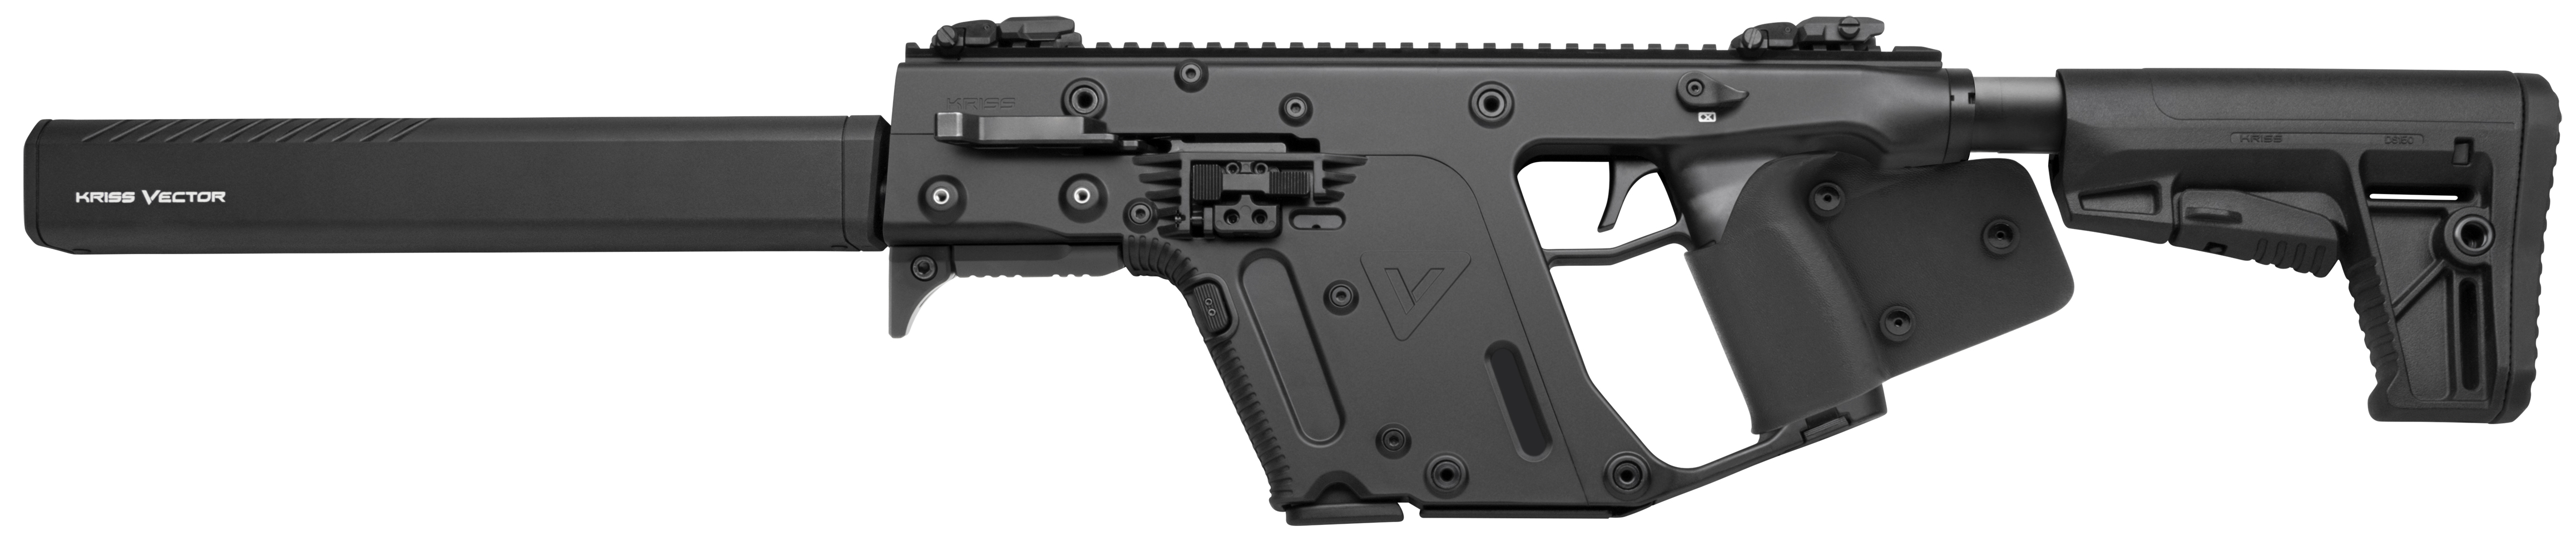 KRISS VECTOR CRB G2 9MM 10RD CA COMPLIANT - #N/A